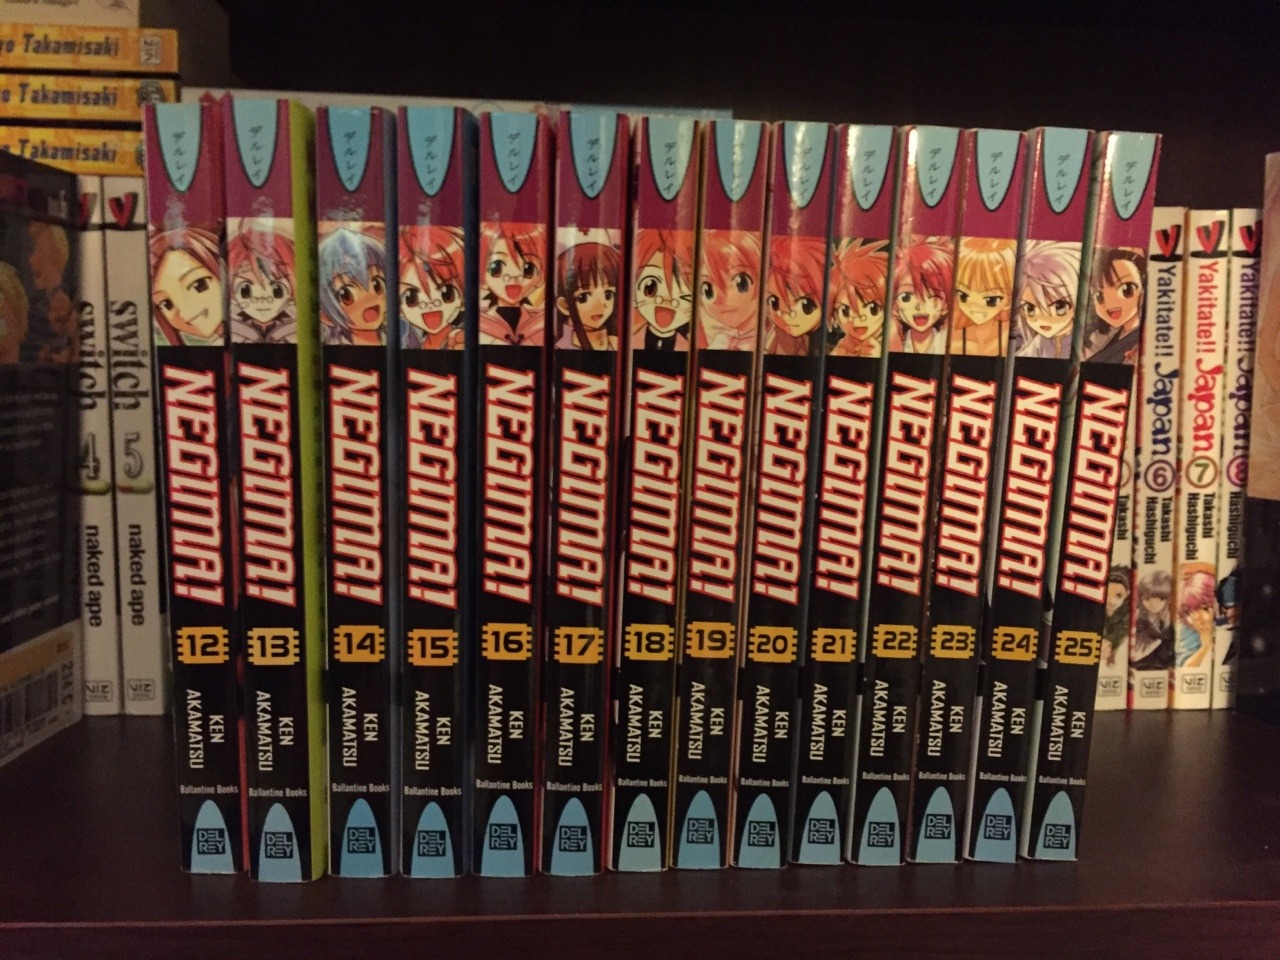 SELLING Negima! English manga from Del Ray. I have volumes 1-25. Selling them $2